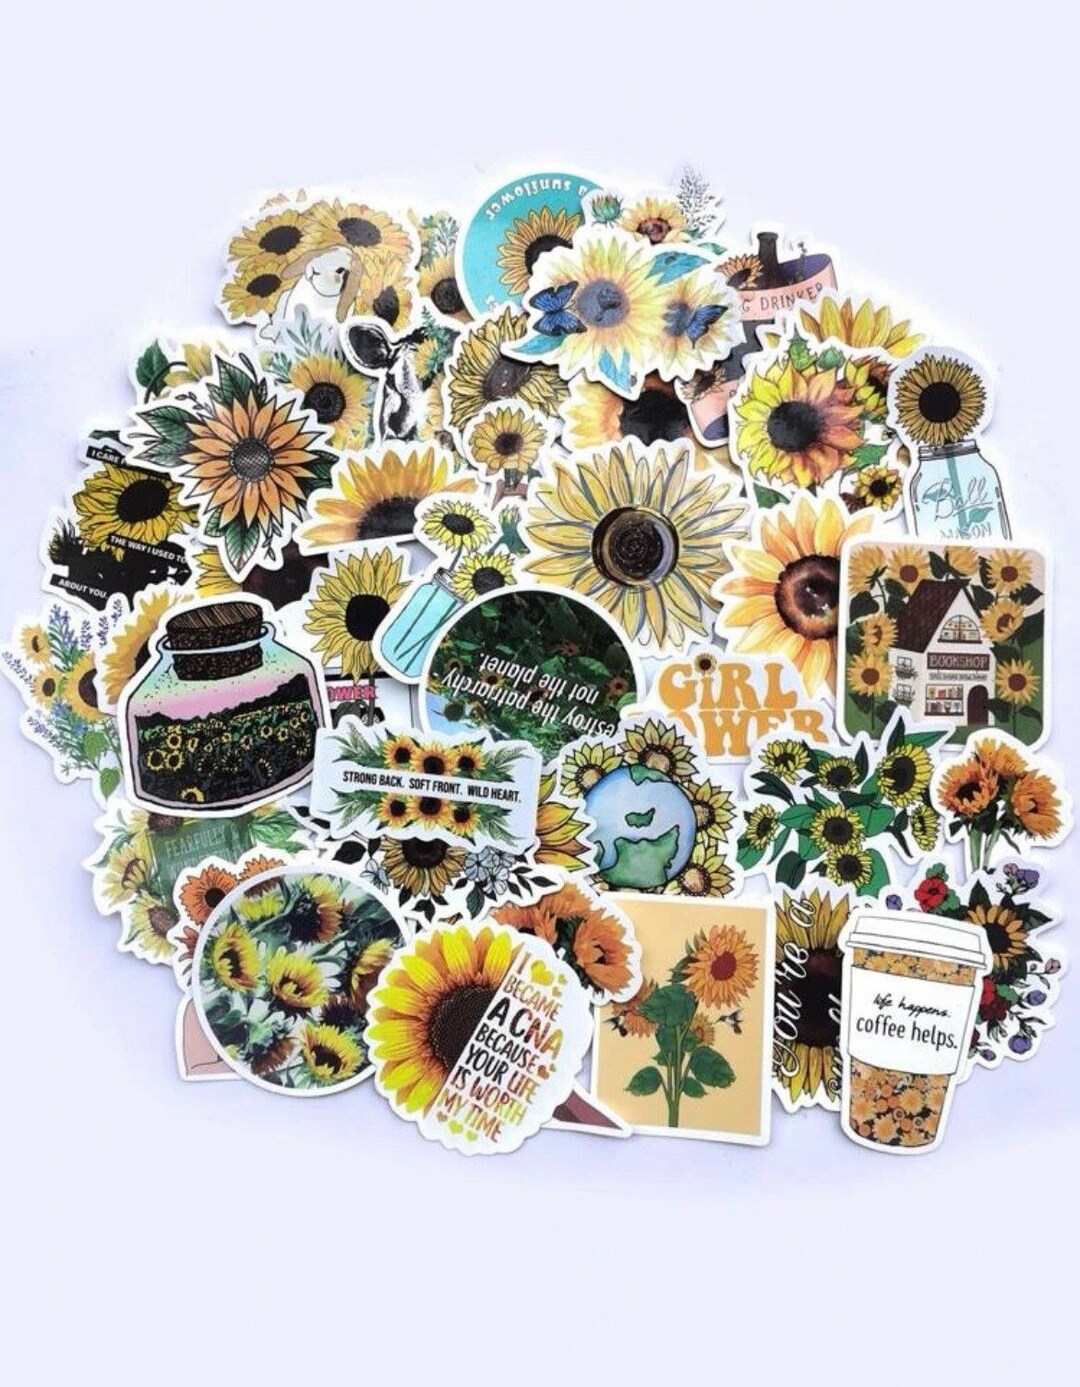 Flower Stickers|50-Pack | Cute,Waterproof,Aesthetic,Trendy Stickers for  Teens,Girls,Perfect for Laptop,Hydro Flask,Phone,Skateboard,Travel| Extra